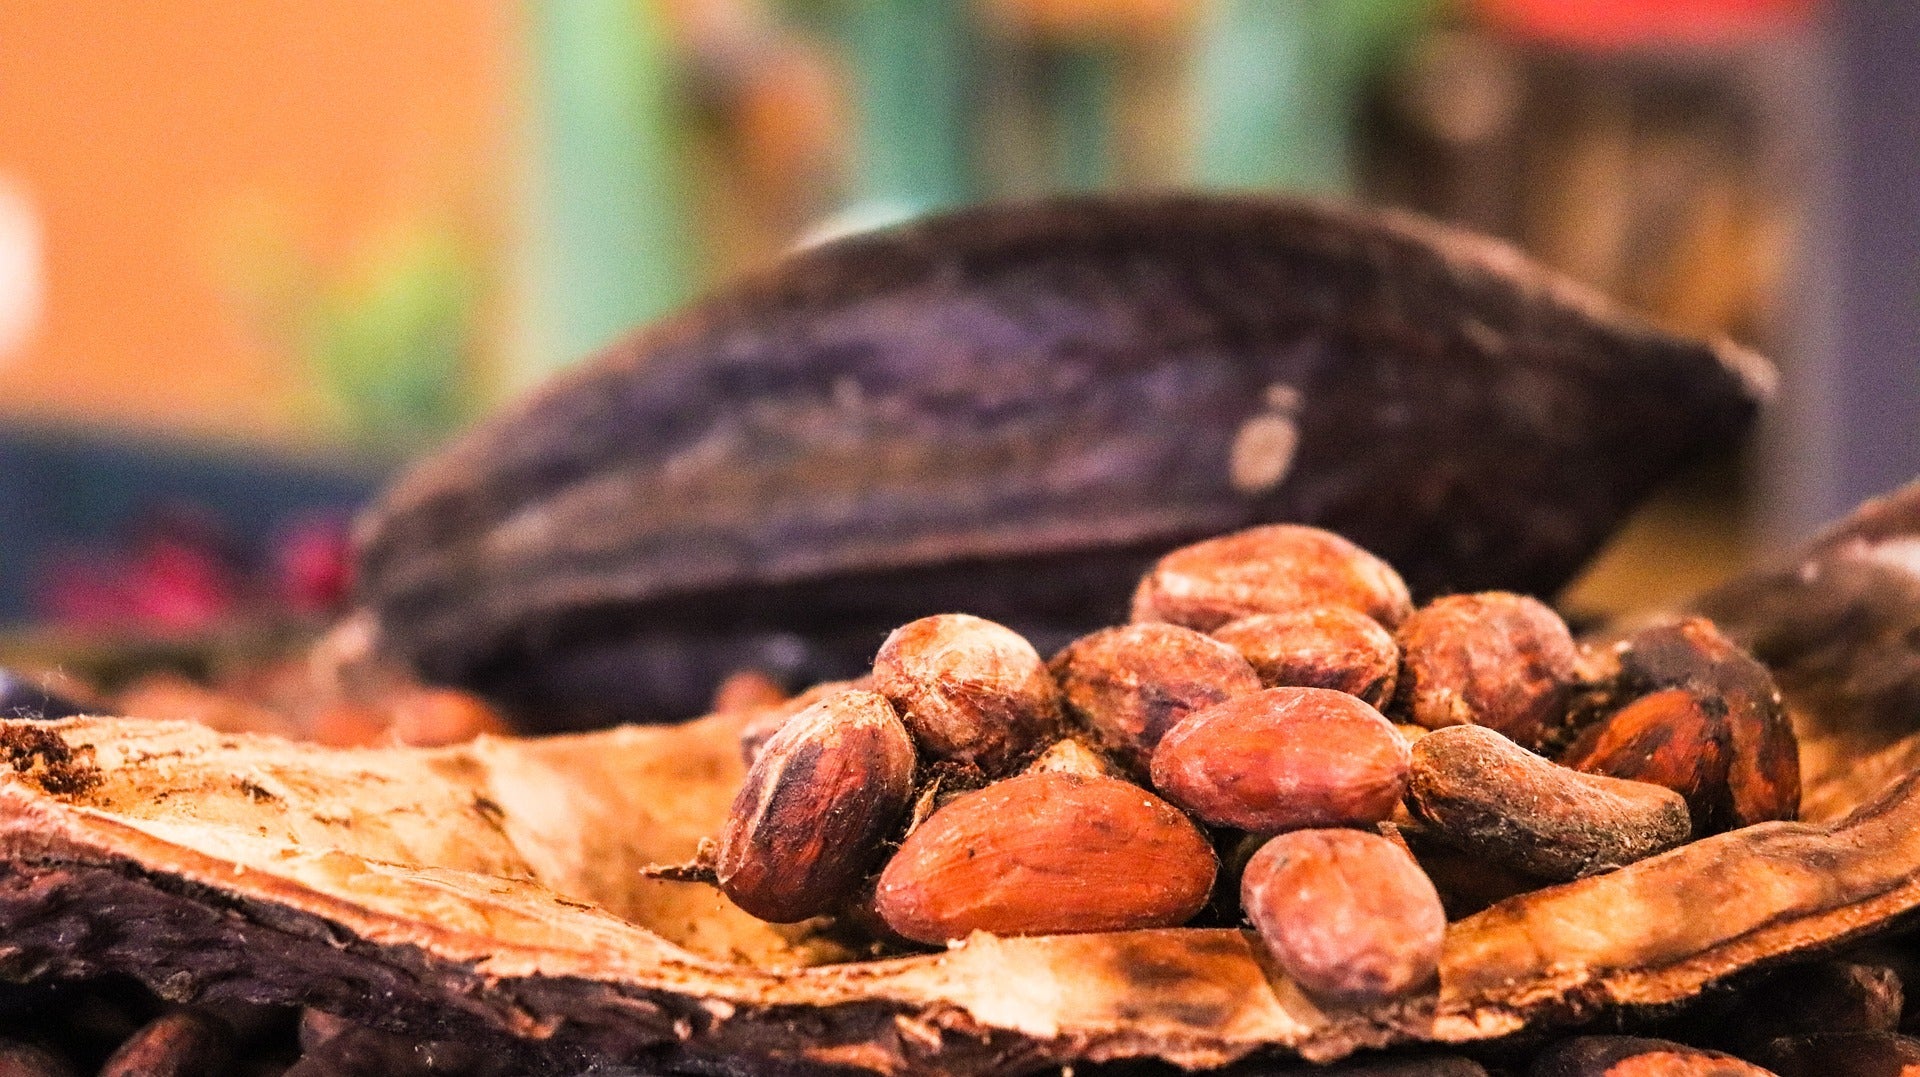 Cacao Vs. Cocoa (What Is The Difference, and How Is Each Made?) - ChocoVivo